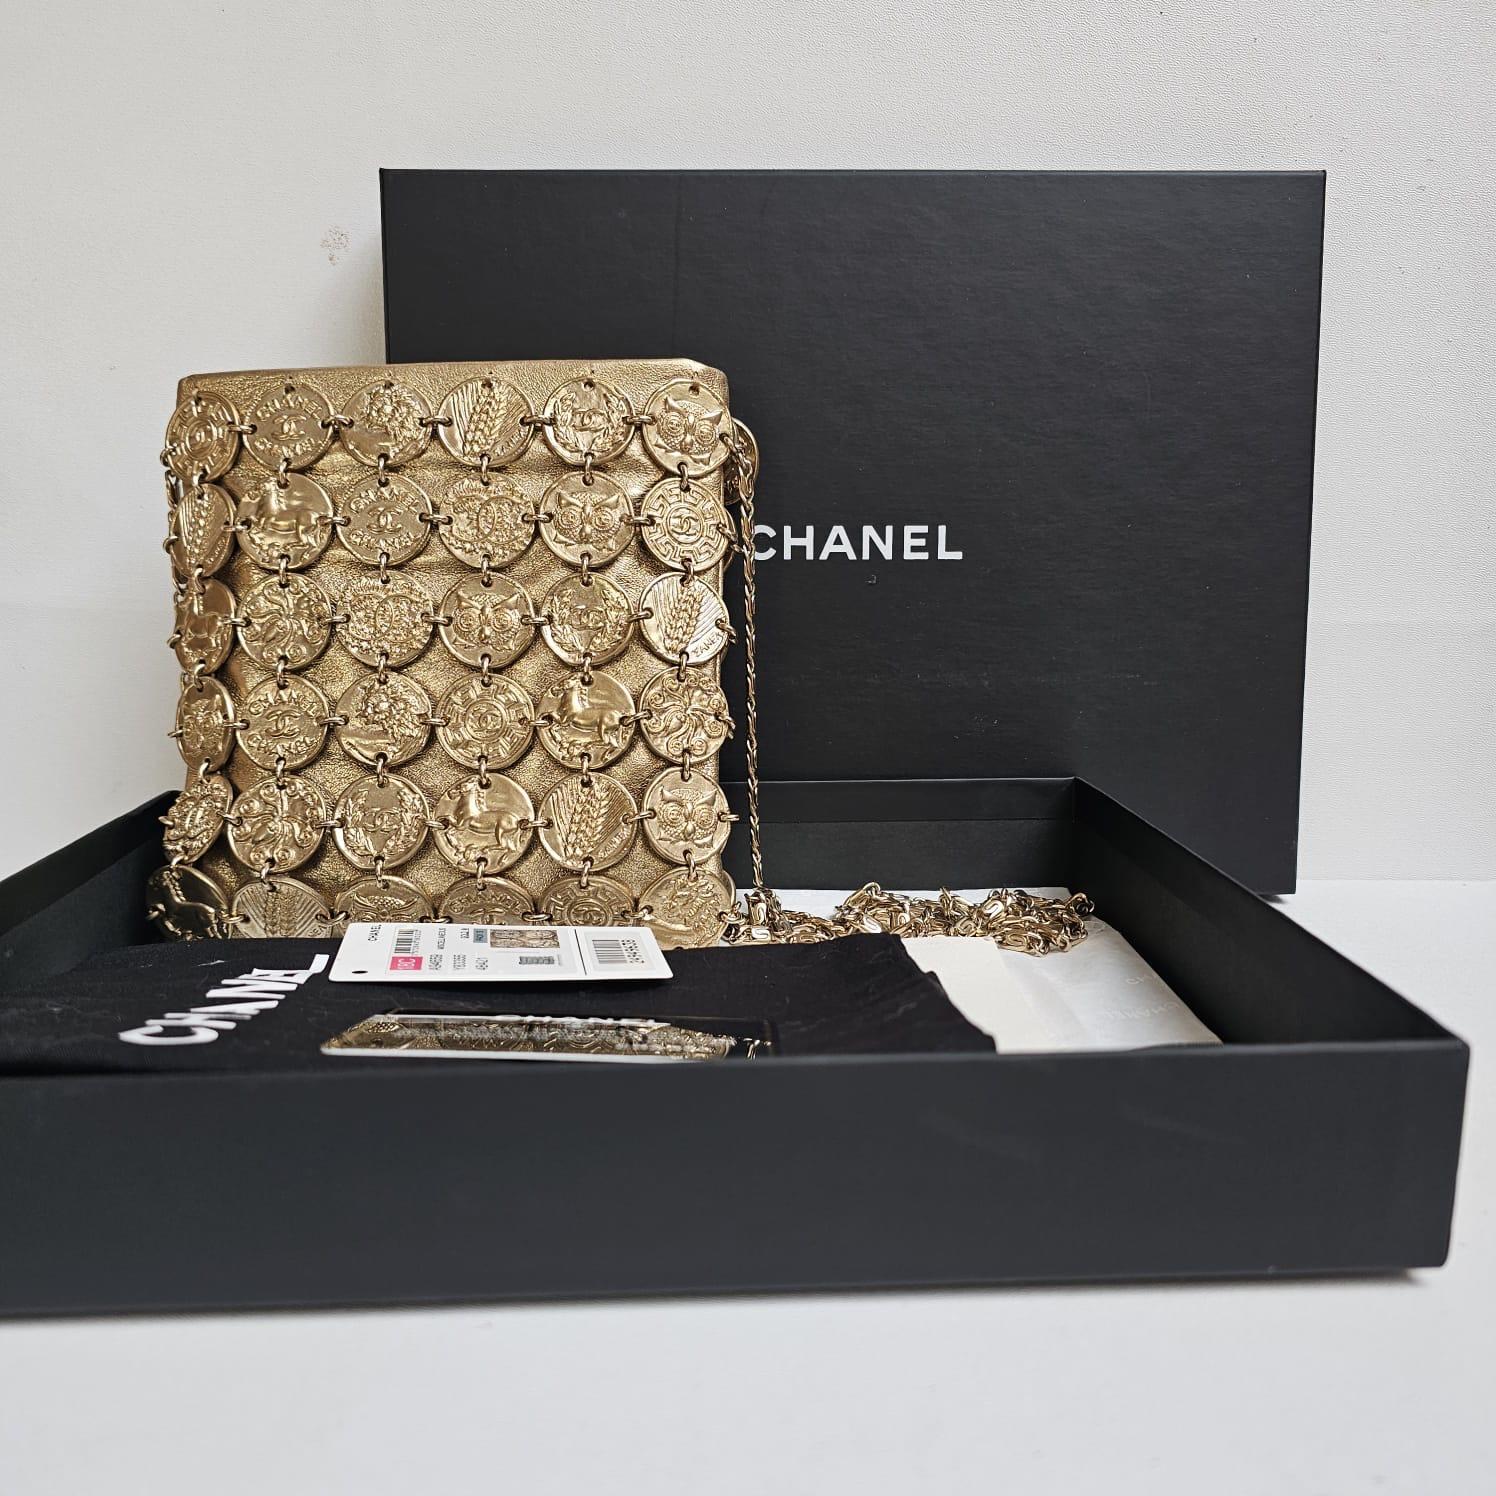 Rare Chanel Cruise 2018 Metier D’Art Gold Medallion Chain Bag For Sale 4